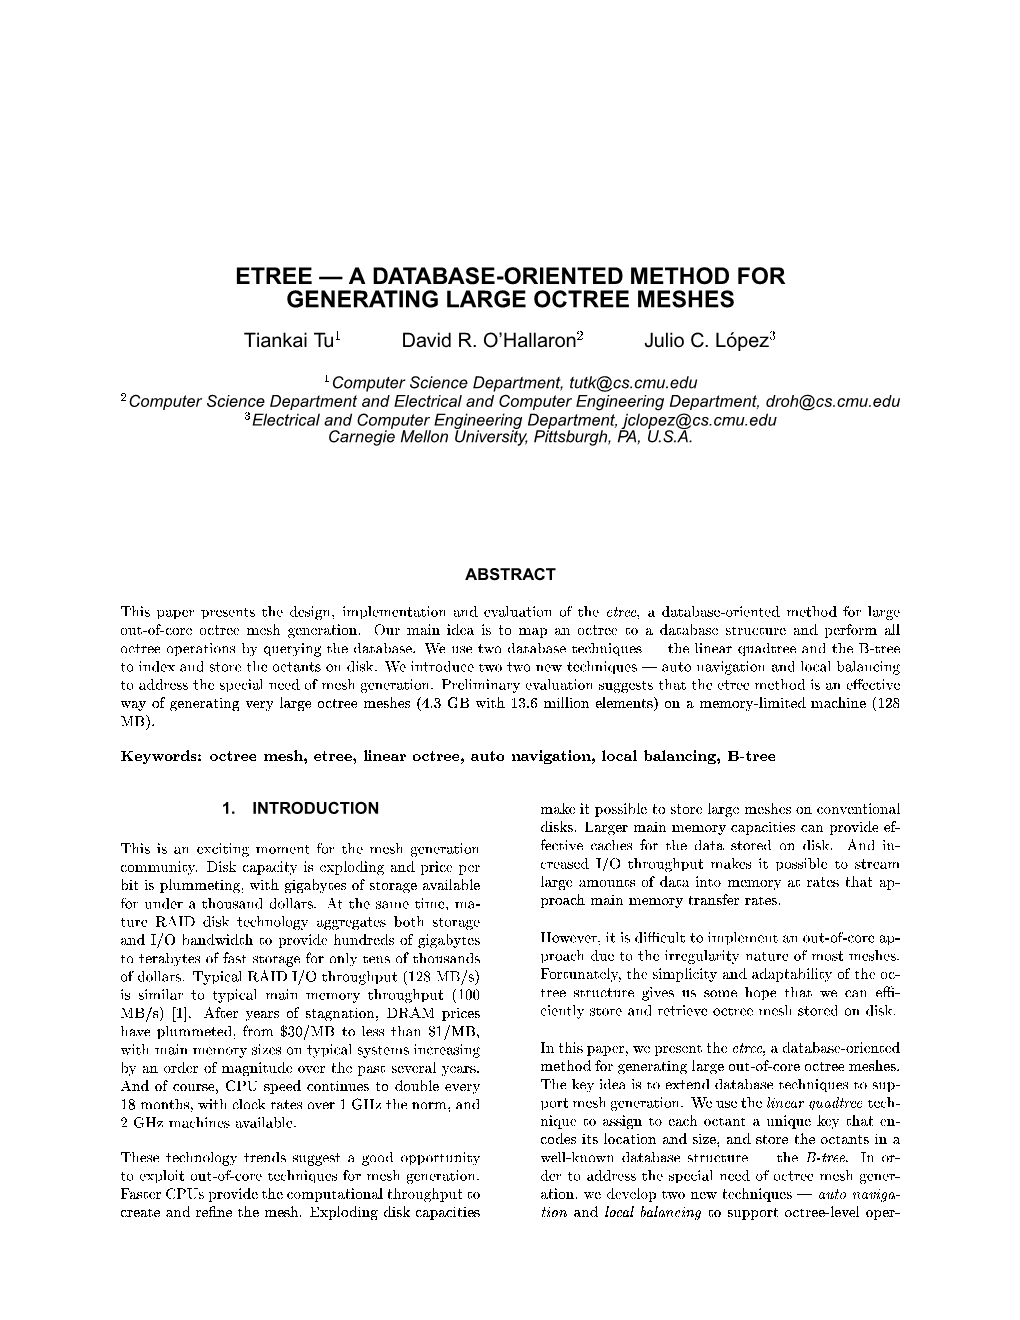 1 2 3 1 2 3 This Paper Presents the Design, Implementation and Evaluation of the Etree, a Database-Oriented Method for Large